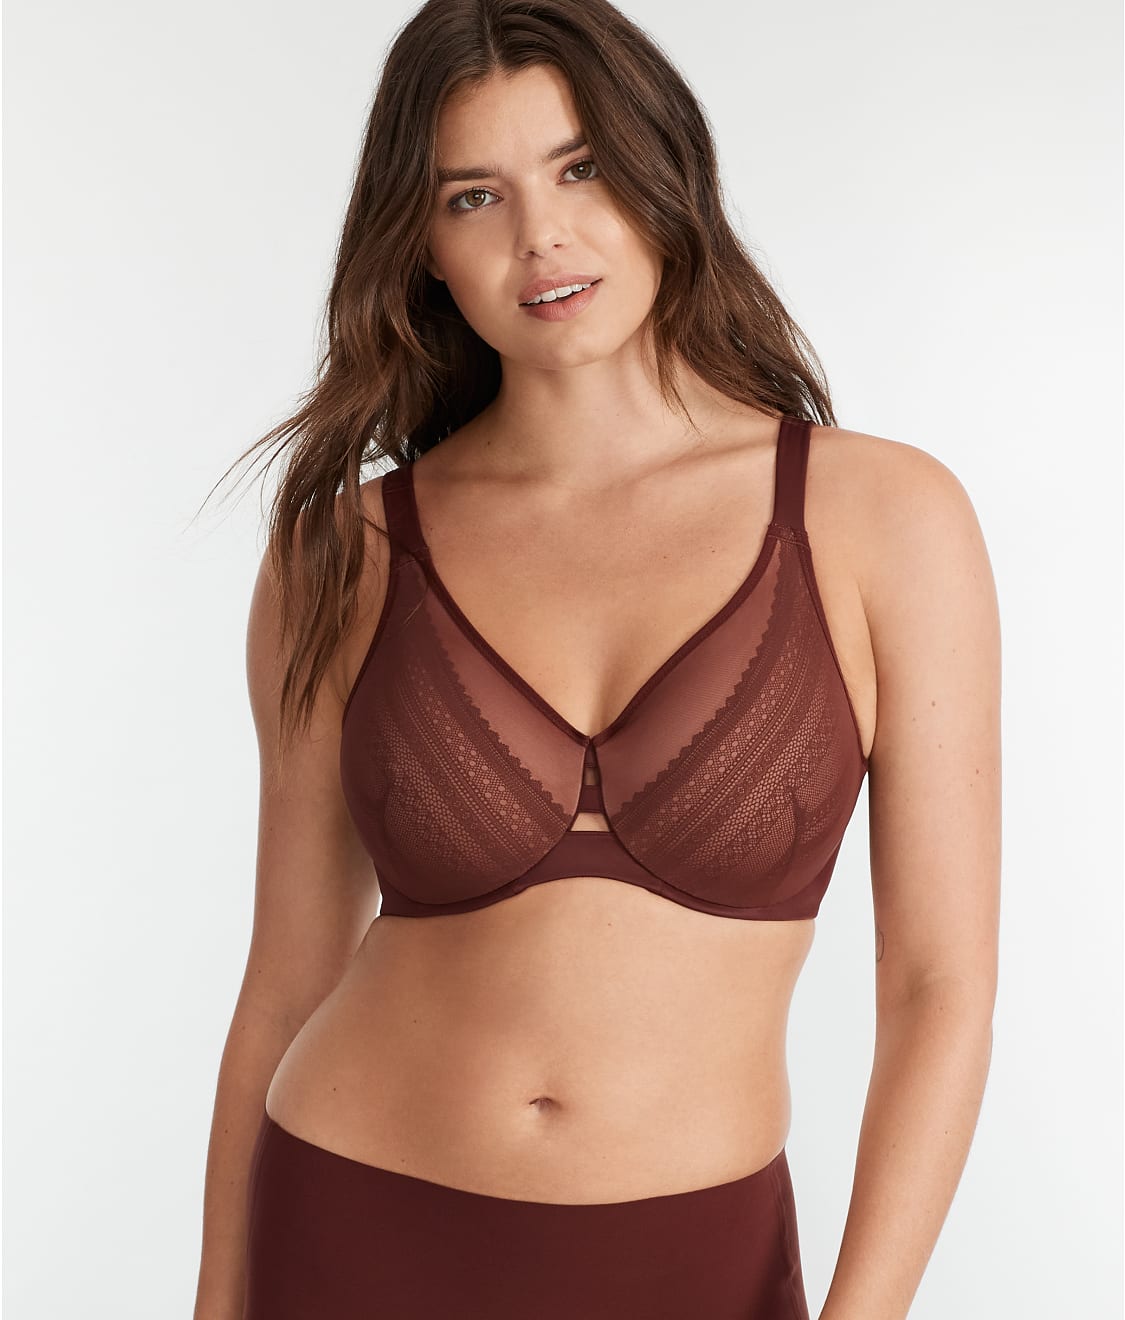 Bali Popular 'Minimizer' Bra Is 69% Off and You Can Try Before